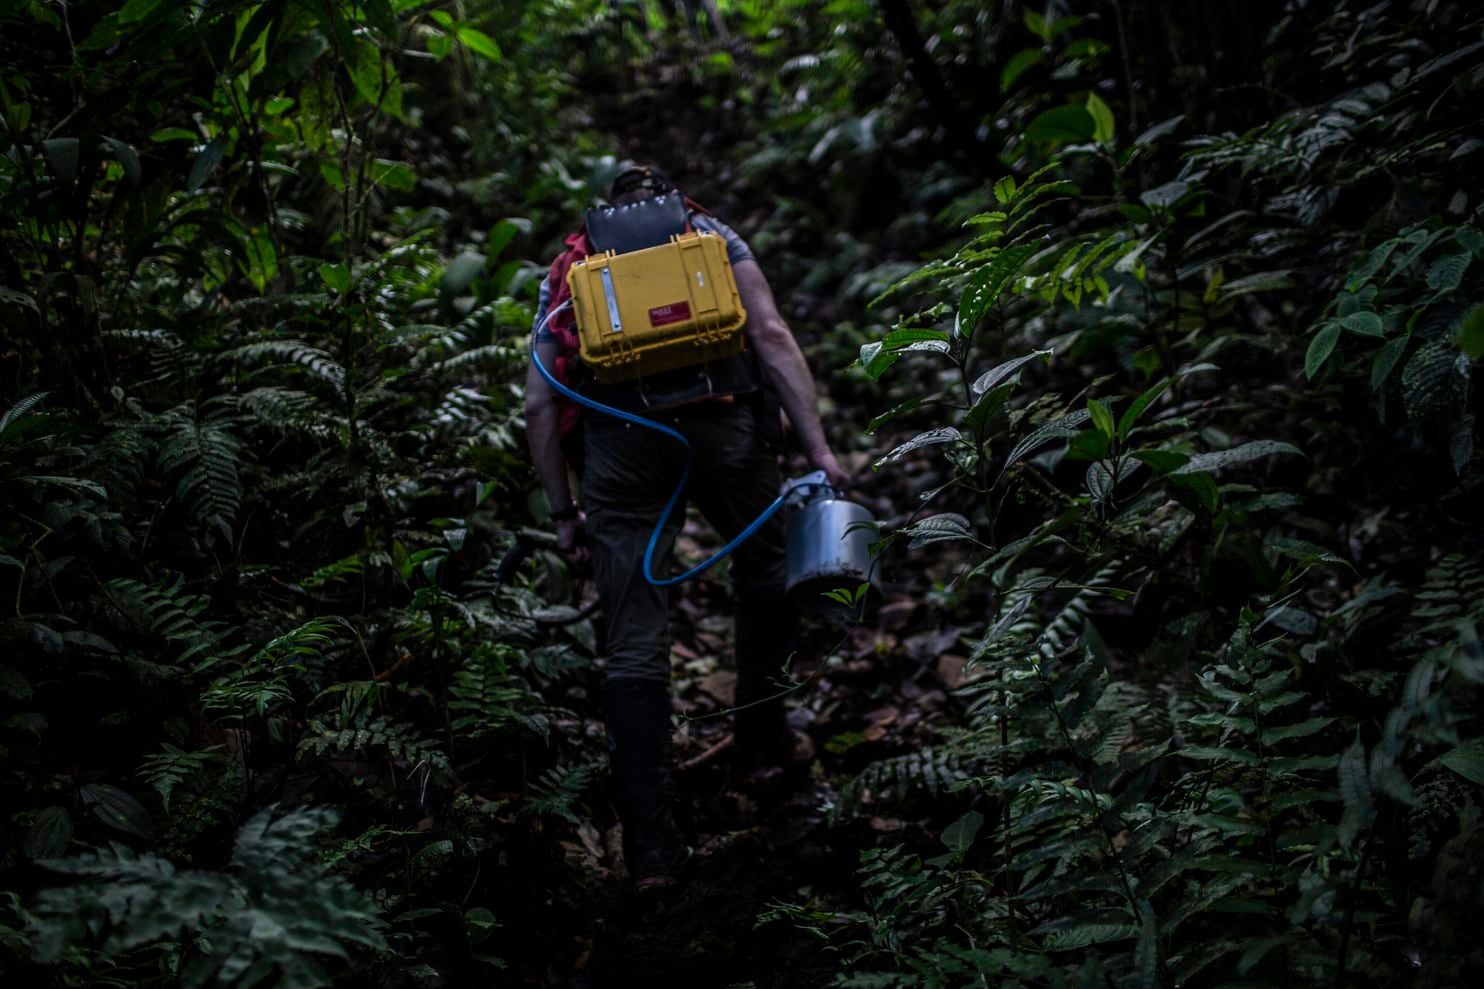 Volcanologist Chad Deering walks through the tropical rainforest with a gas-testing kit. Image by Dado Galdieri / Hilaea Media. Costa Rica, 2020.